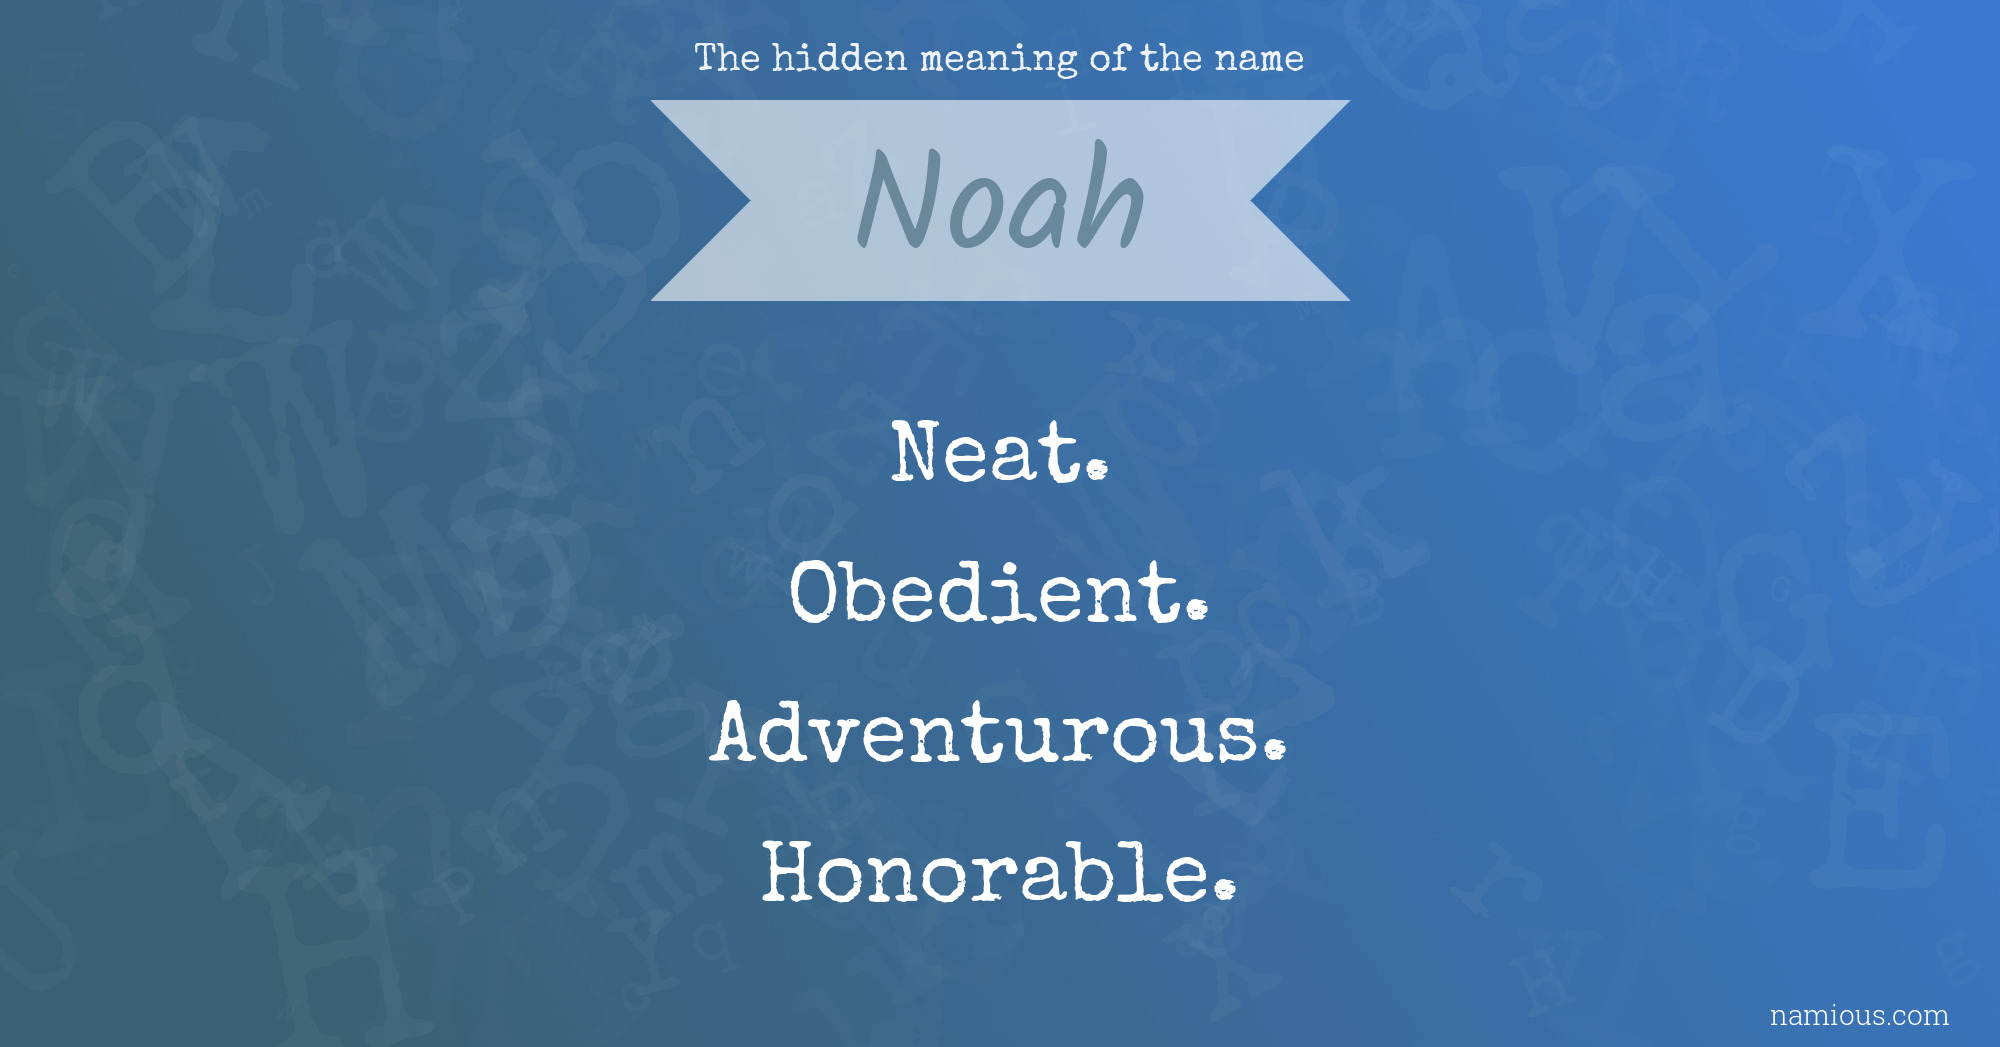 The hidden meaning of the name Noah